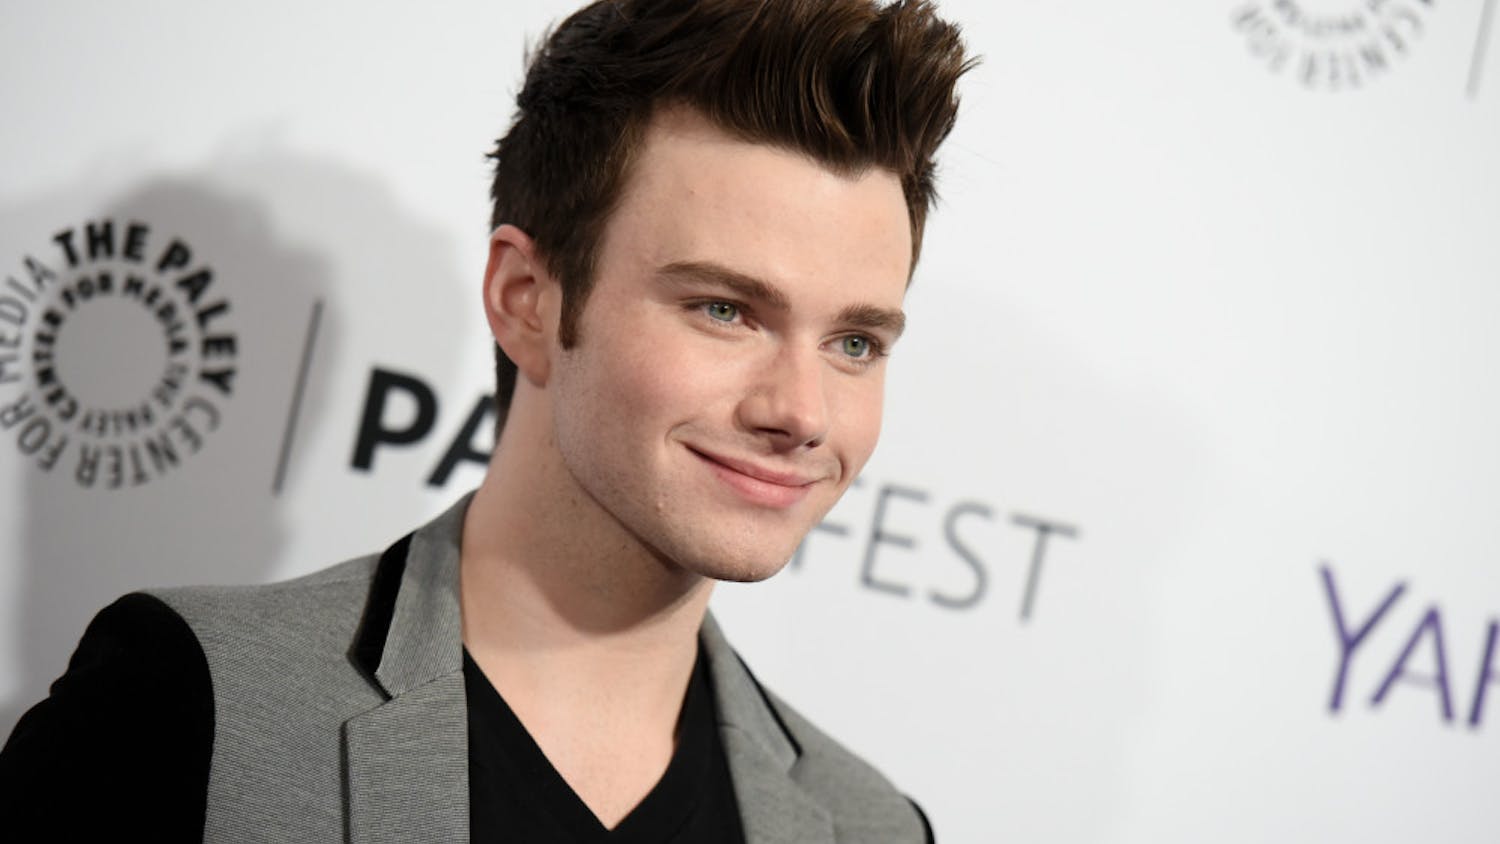 Chris Colfer arrives at the 32nd Annual Paleyfest : "Glee" held at The Dolby Theatre on Friday, March 13, 2015, in Los Angeles. 